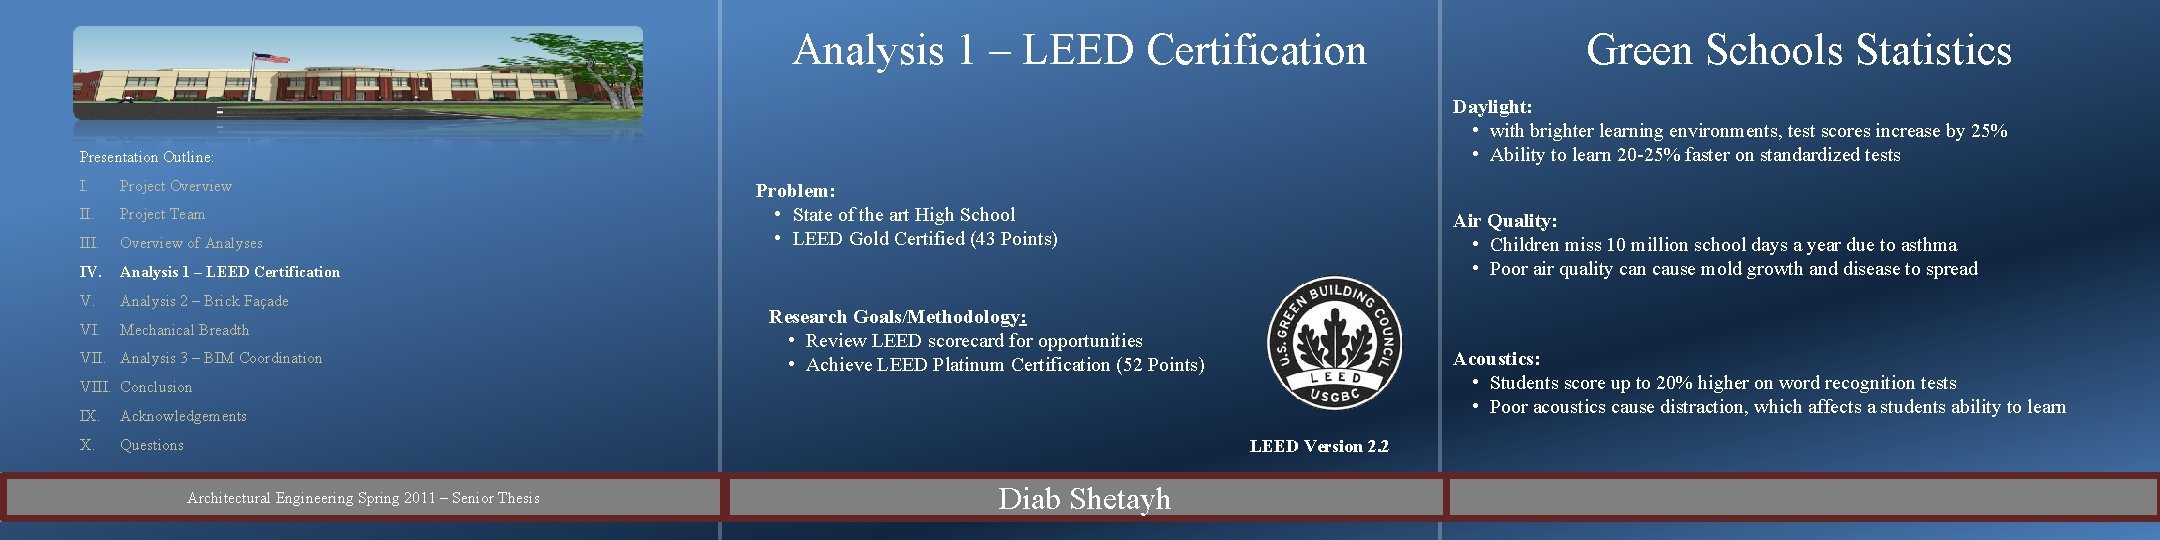 Analysis 1 – LEED Certification Daylight: • with brighter learning environments, test scores increase